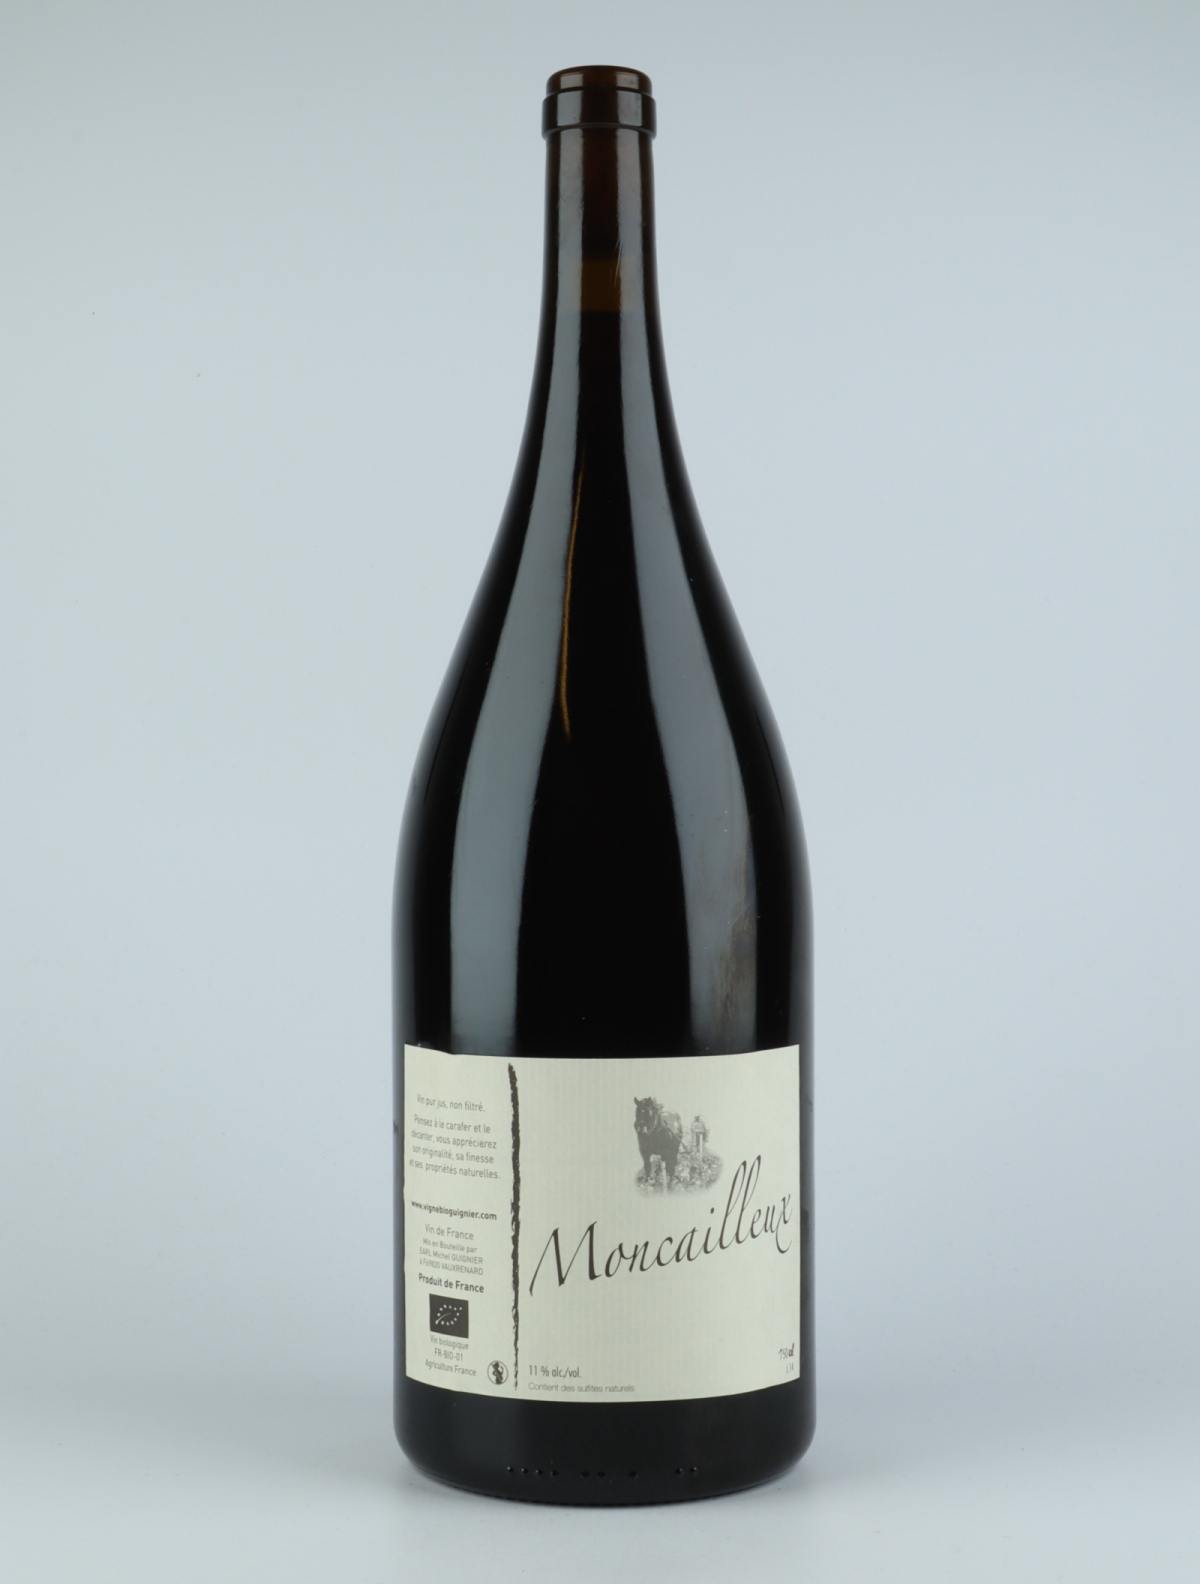 A bottle 2014 Moncailleux Red wine from Michel Guignier, Beaujolais in France